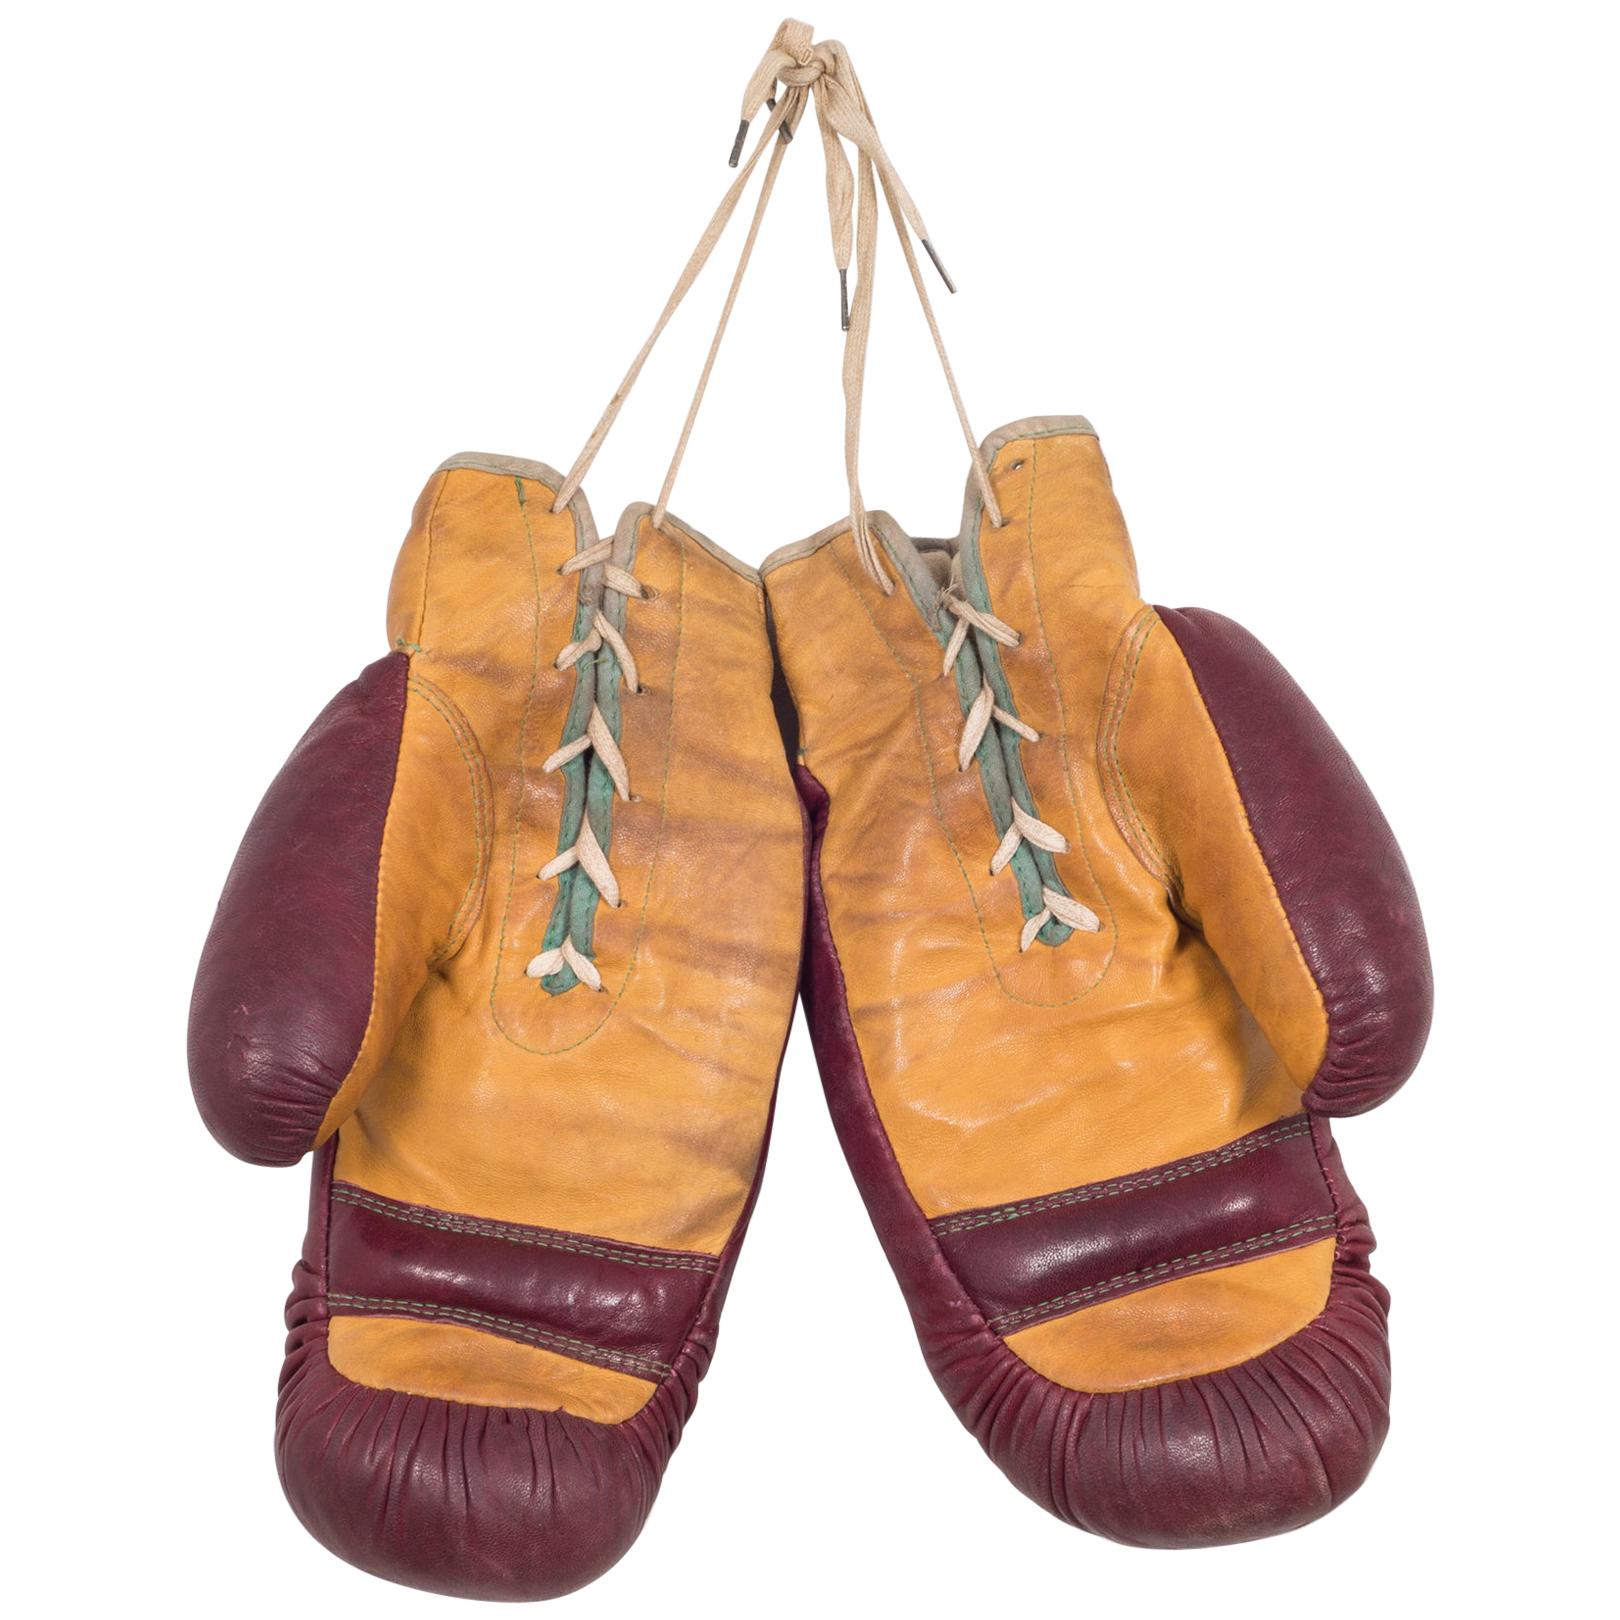 Pair of Vintage Horse Hair and Leather Boxing Gloves, circa 1930-1940